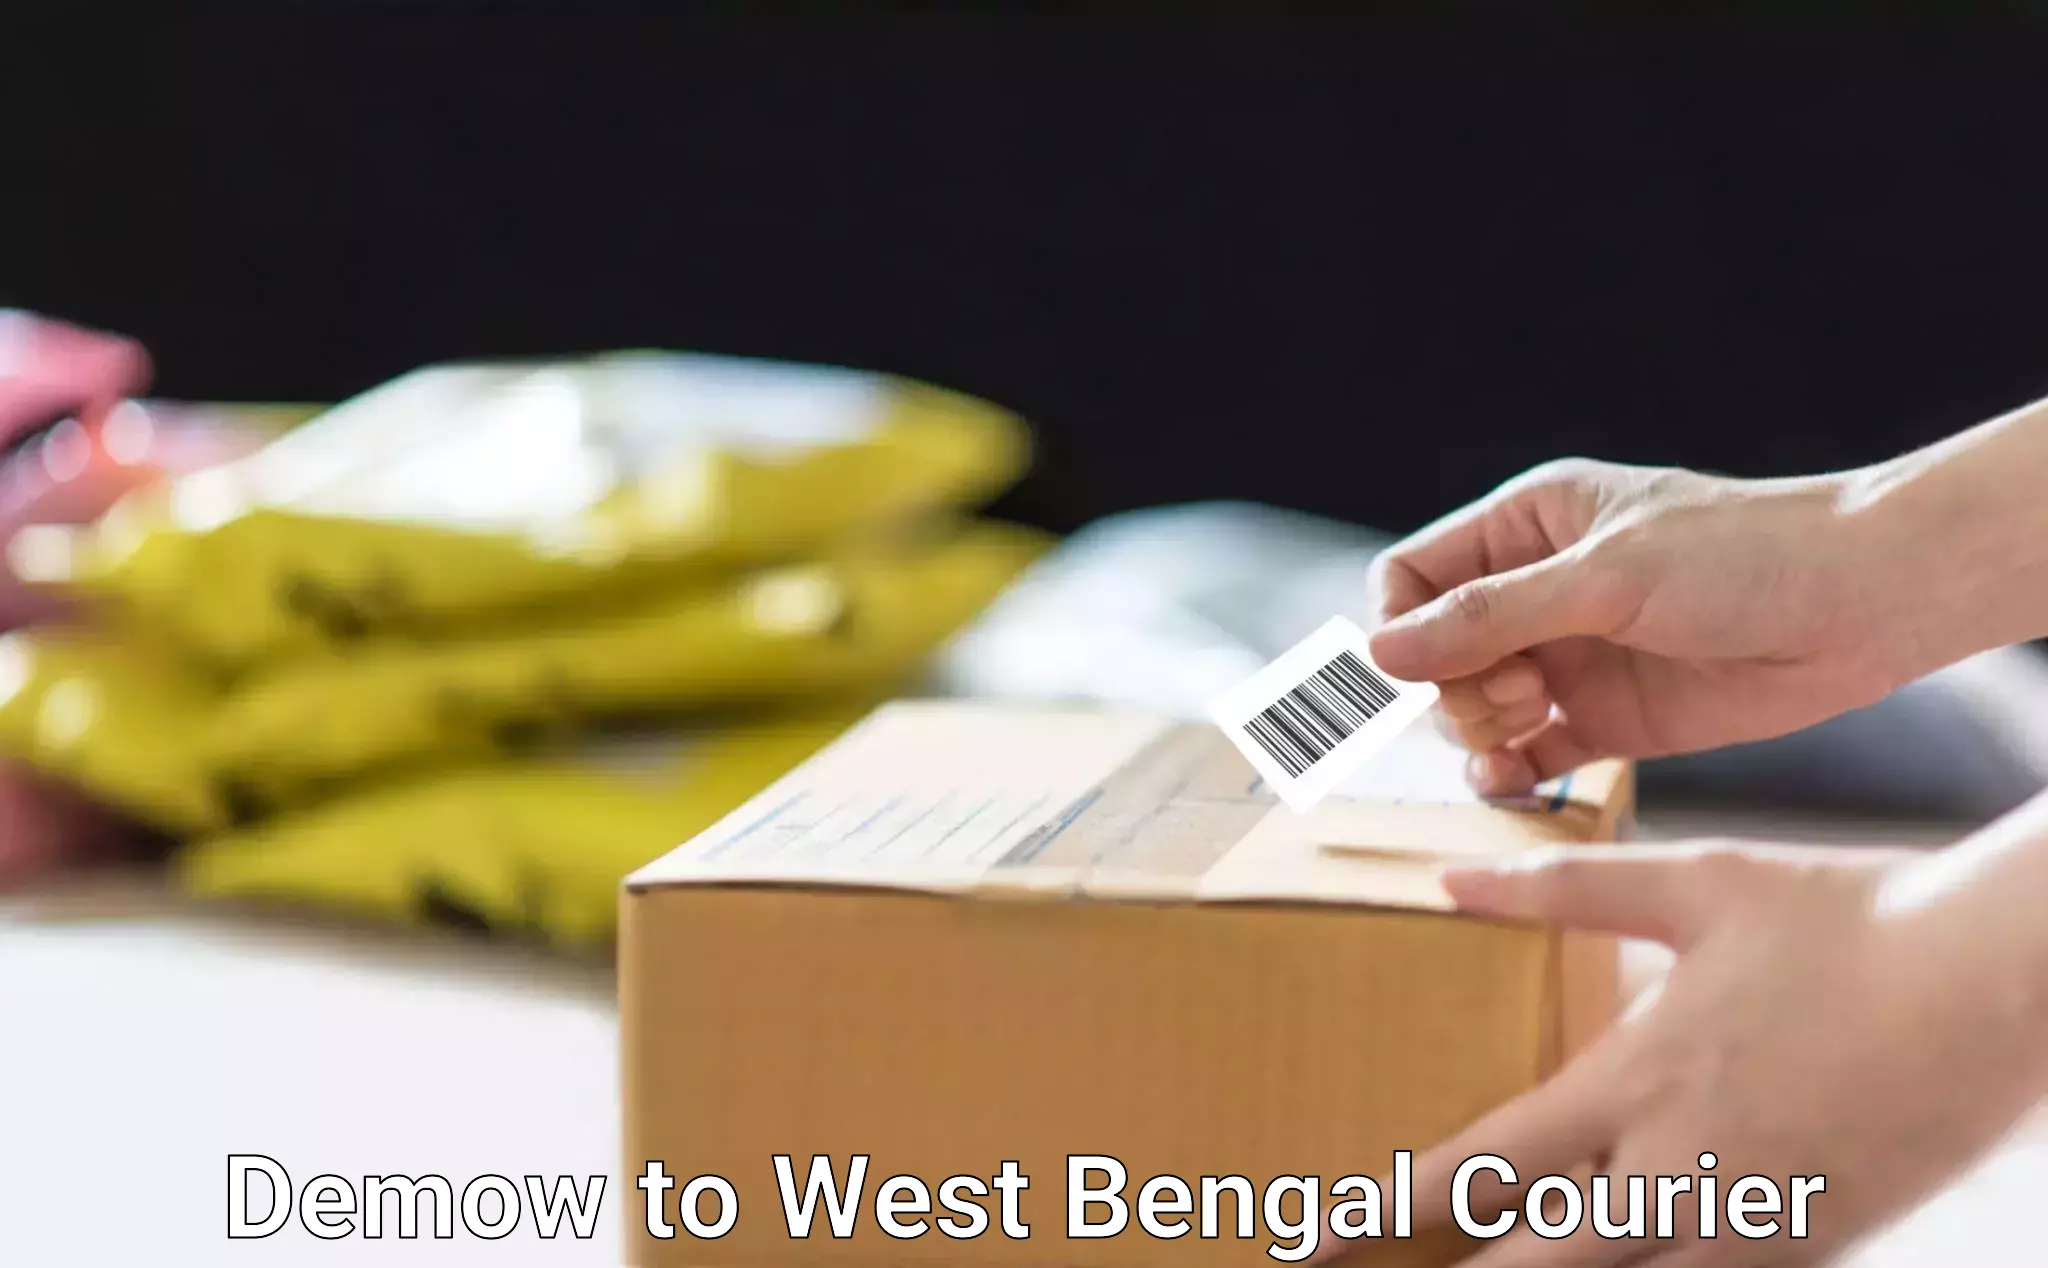 Next-day delivery options Demow to West Bengal